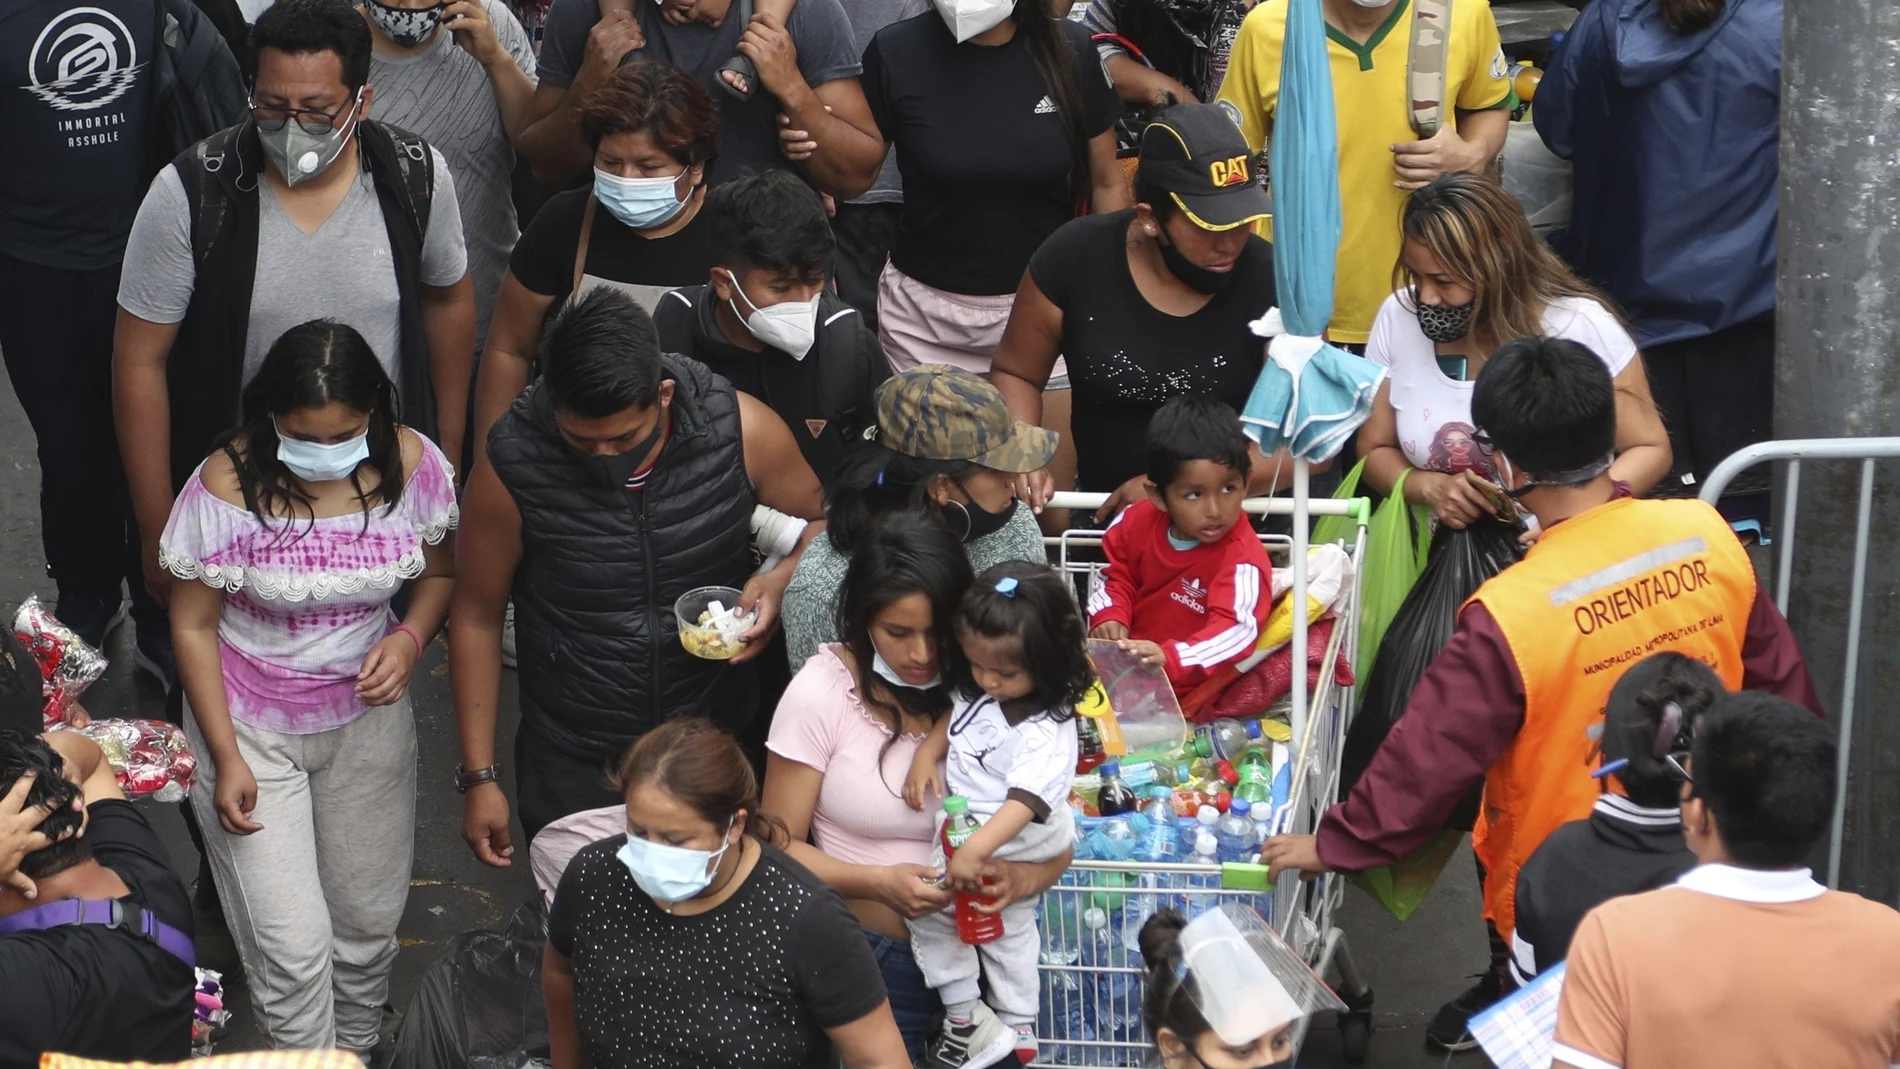 Pedestrians wearing face masks amid the COVID-19 pandemic walk in the Mesa Redonda Market, a popular spot for Christmas shopping in Lima, Peru, Friday, Dec. 18, 2020. Peru's Health Ministry has announced on Tuesday, Dec. 22, that it has surpassed 1 million confirmed cases of the new coronavirus. (AP Photo/Martin Mejia, File)